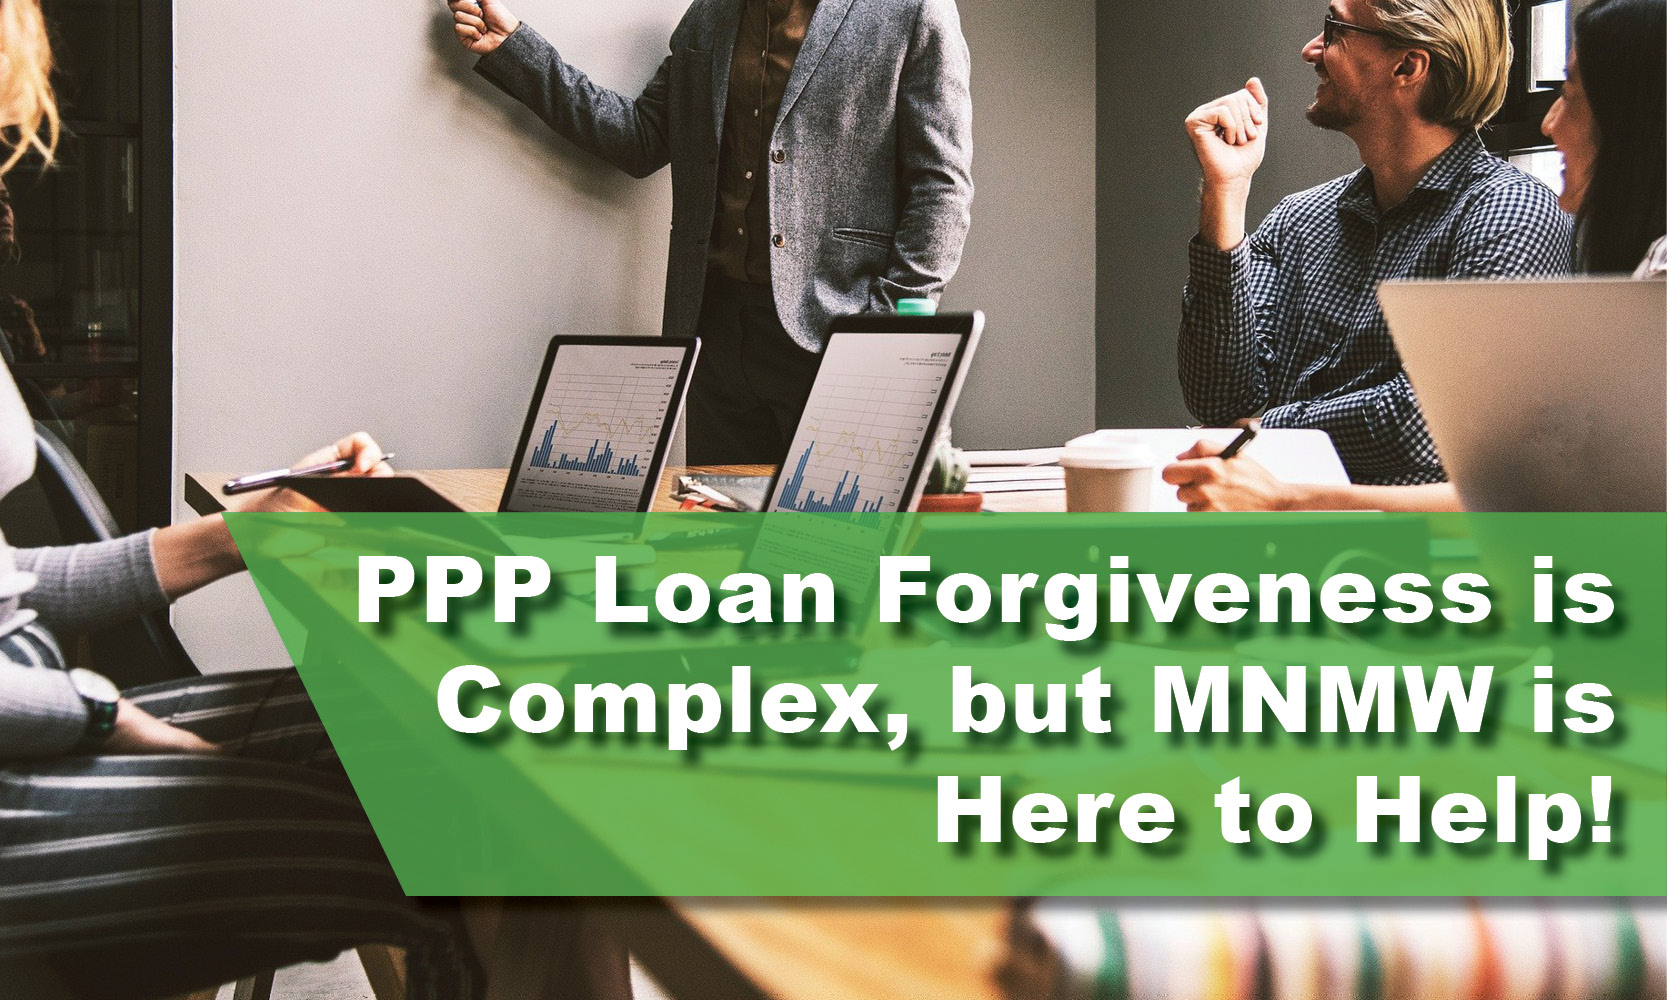 PPP Loan Forgiveness is Complex